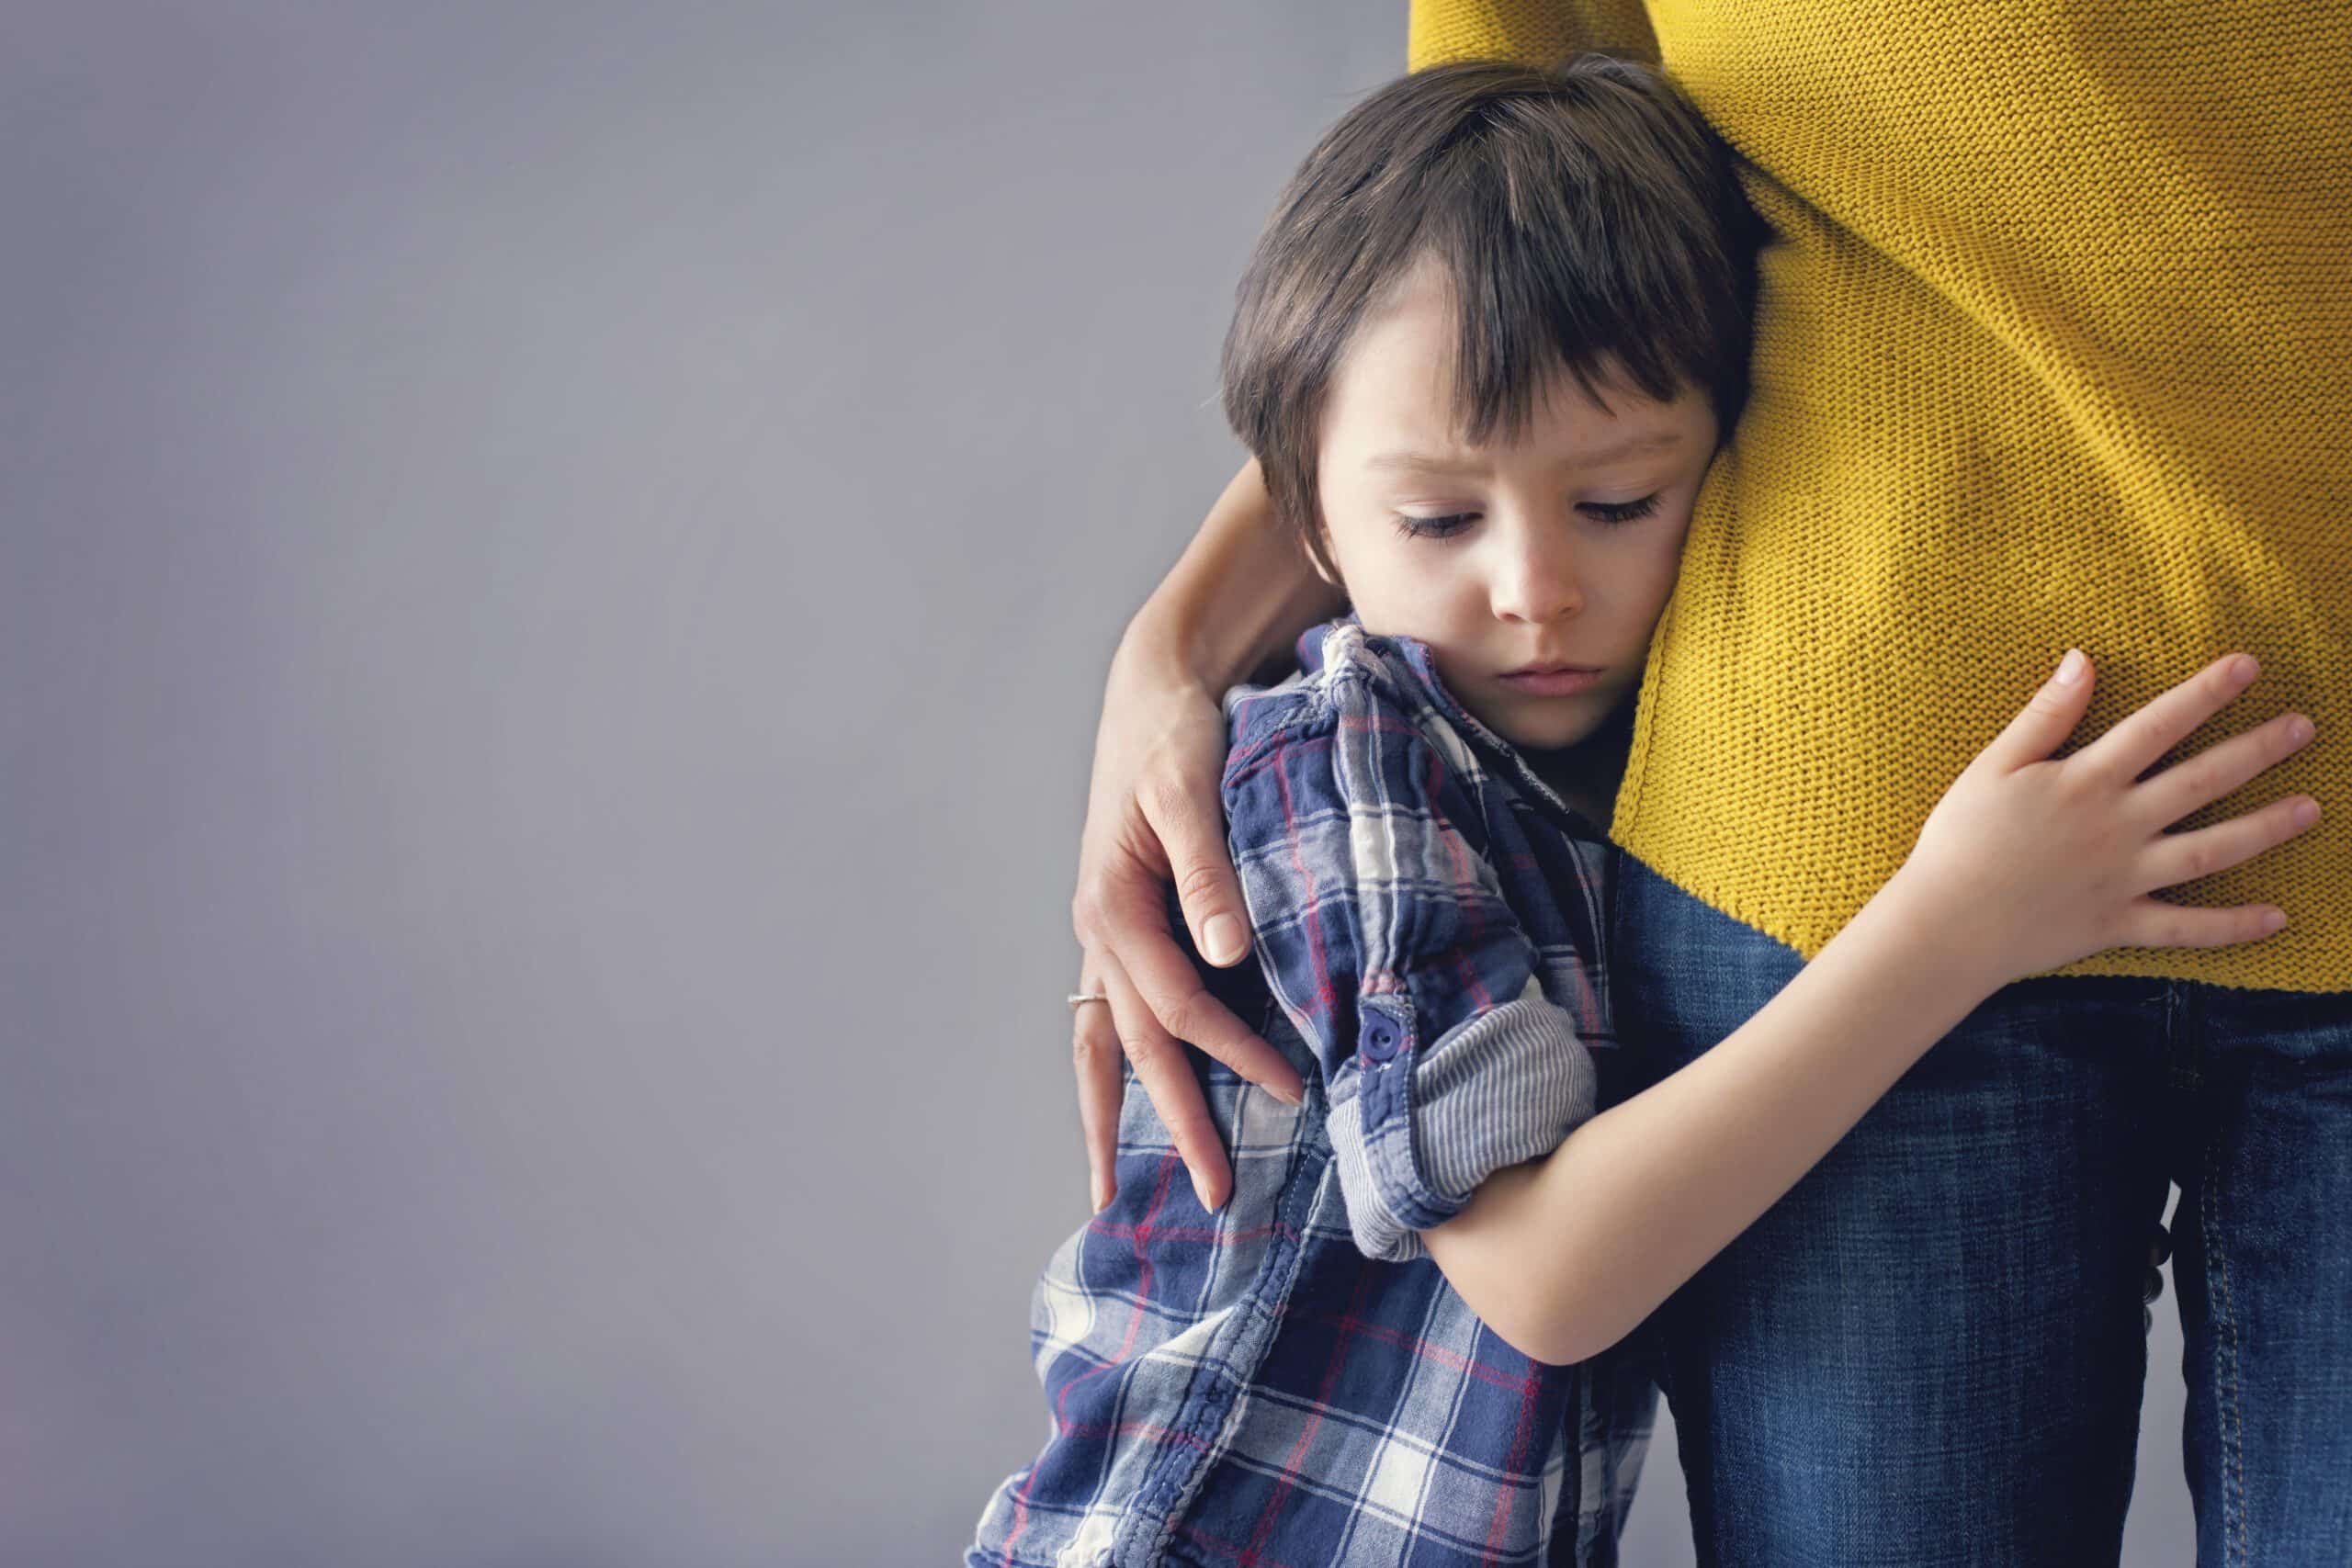 How to help anxious child